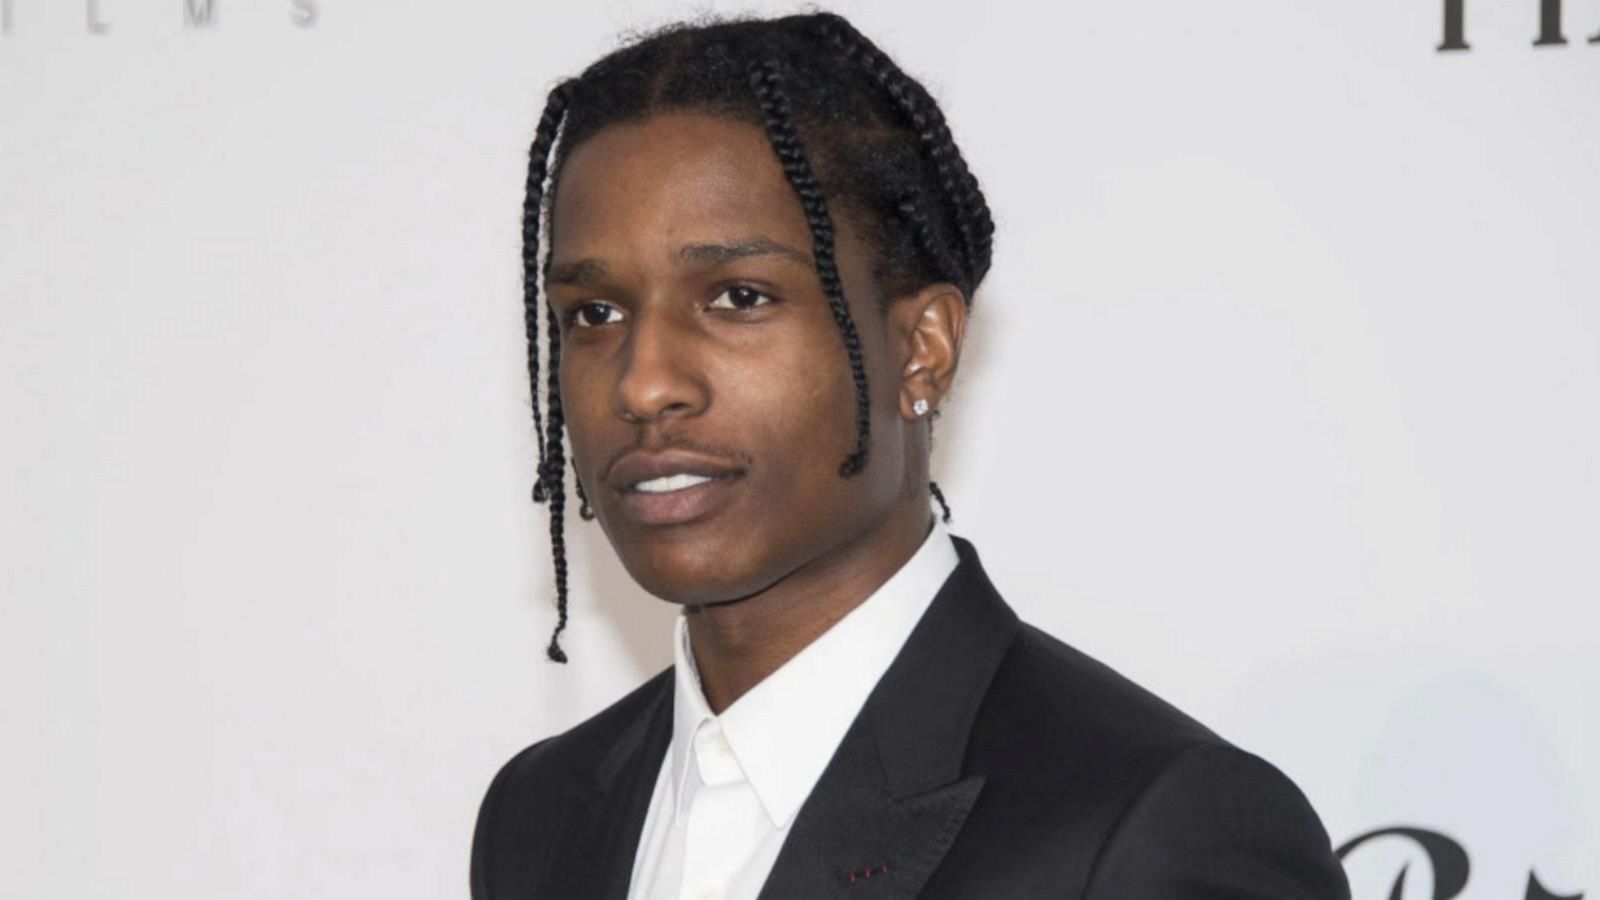 Trump is stepping up for A$AP Rocky to be released - Good Morning America